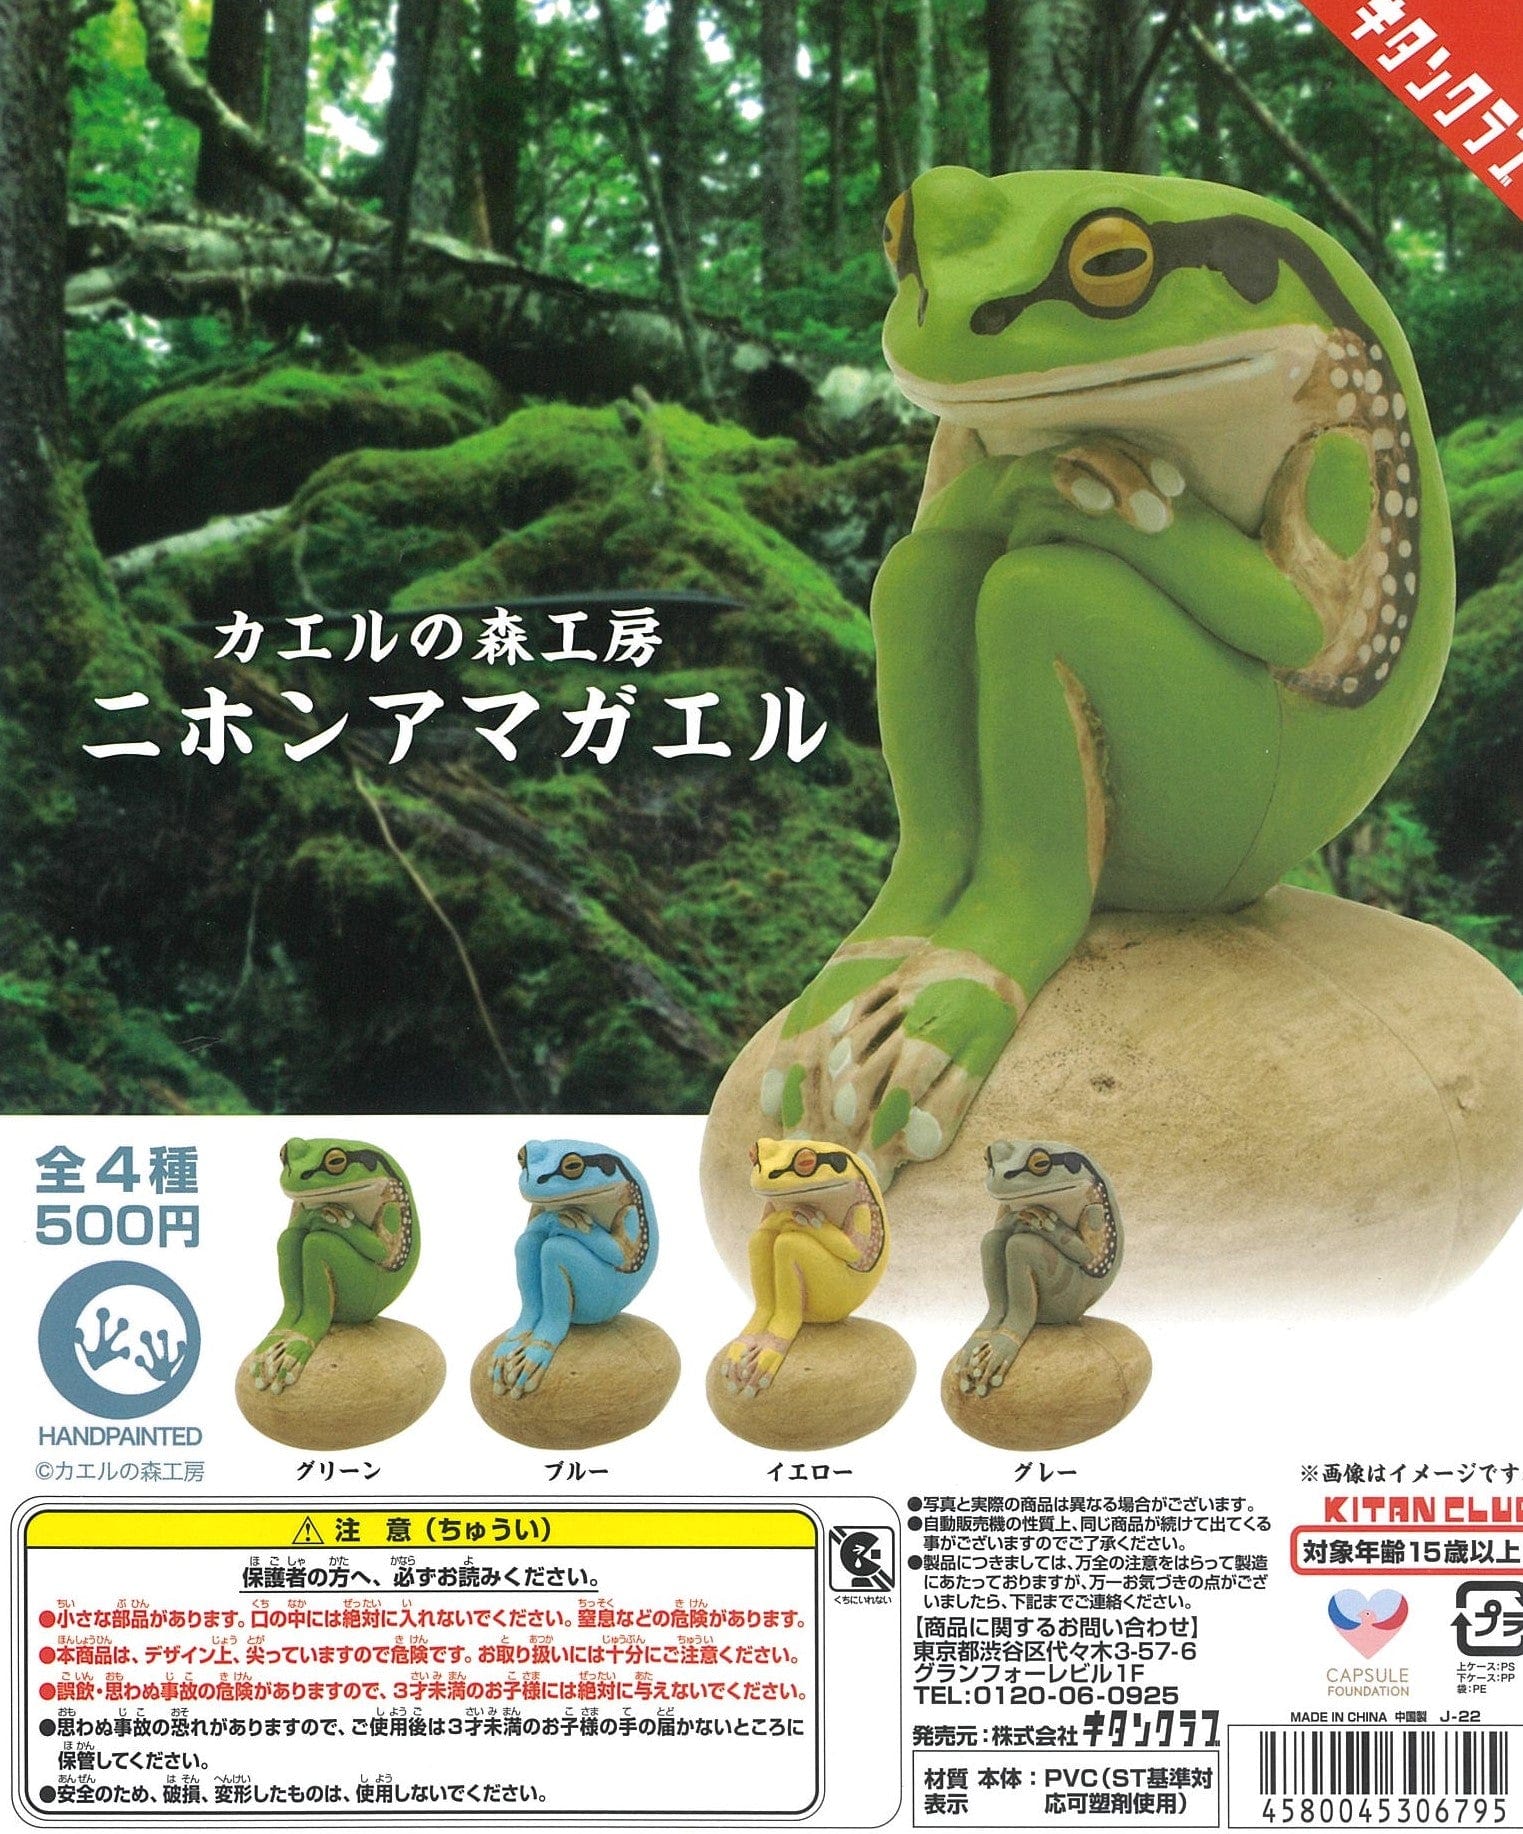 Kitan Club CP1985 FOREST AMP Japanese Tree Frog